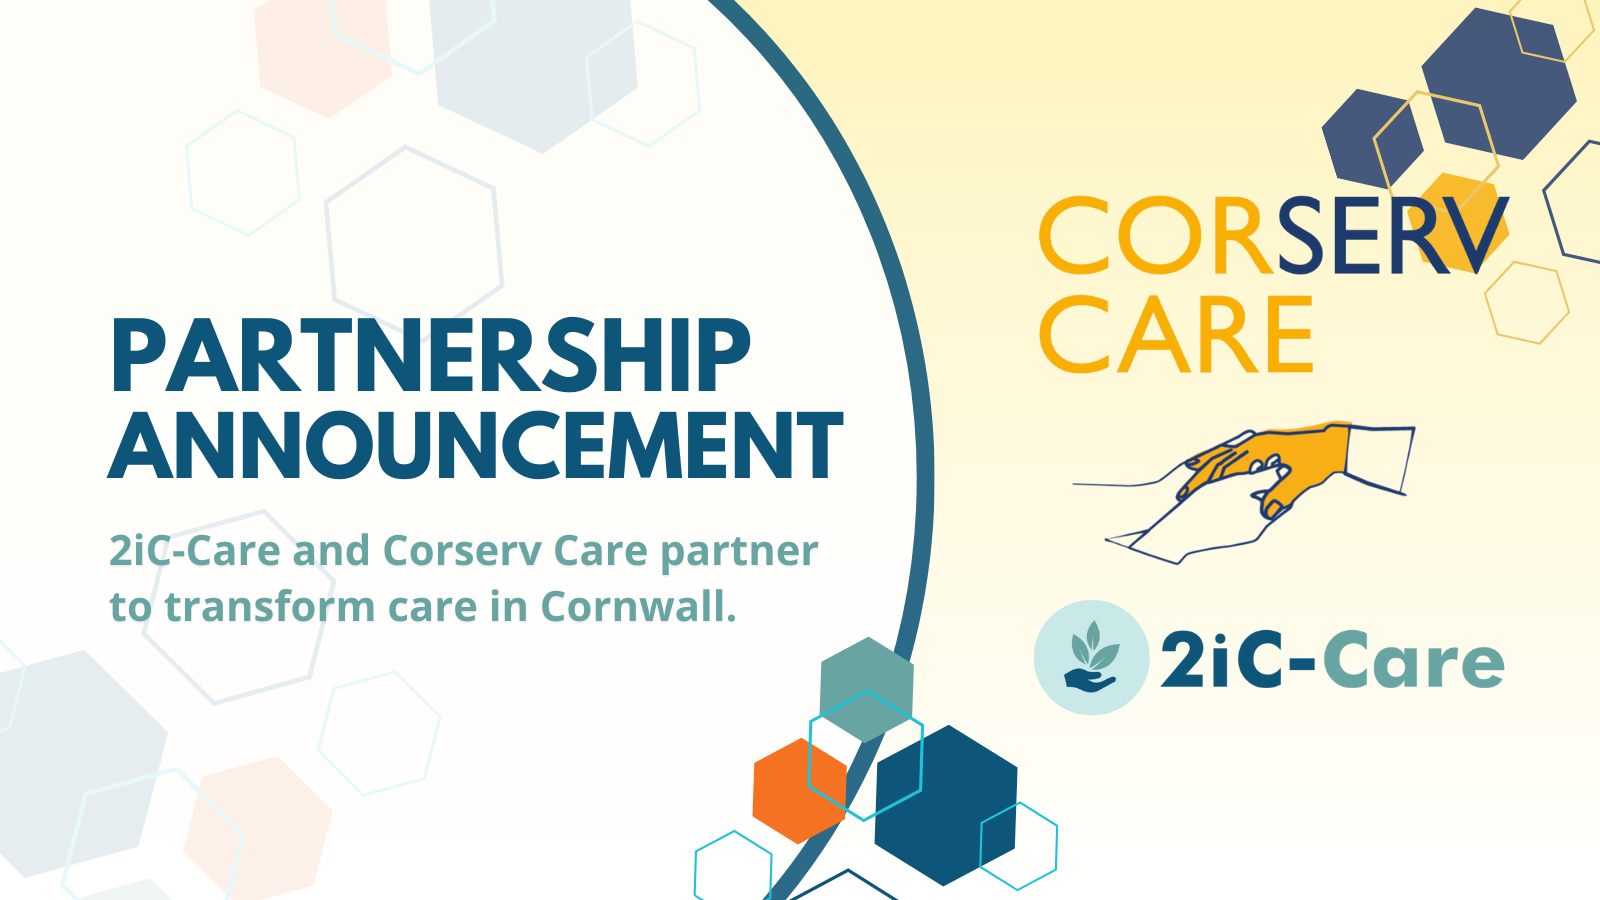 “If we keep doing the same things, we will not meet the demand” Corserv Care and 2iC-Care partner to transform care in Cornwall.